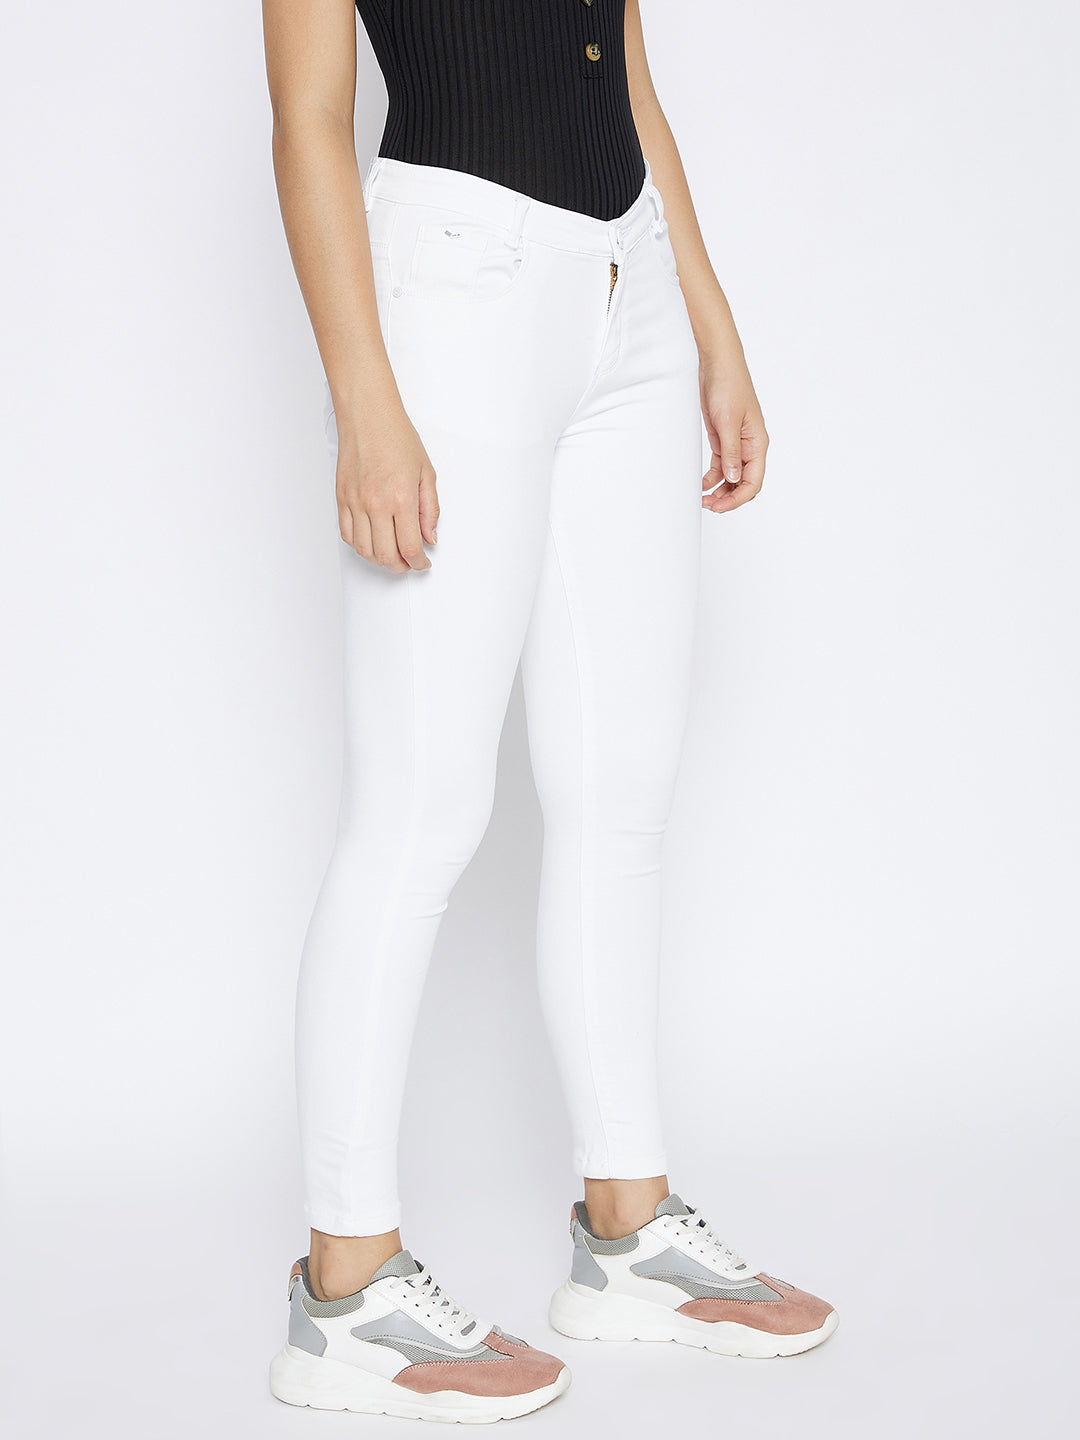 White Super Skinny Fit Jeans - Women Jeans